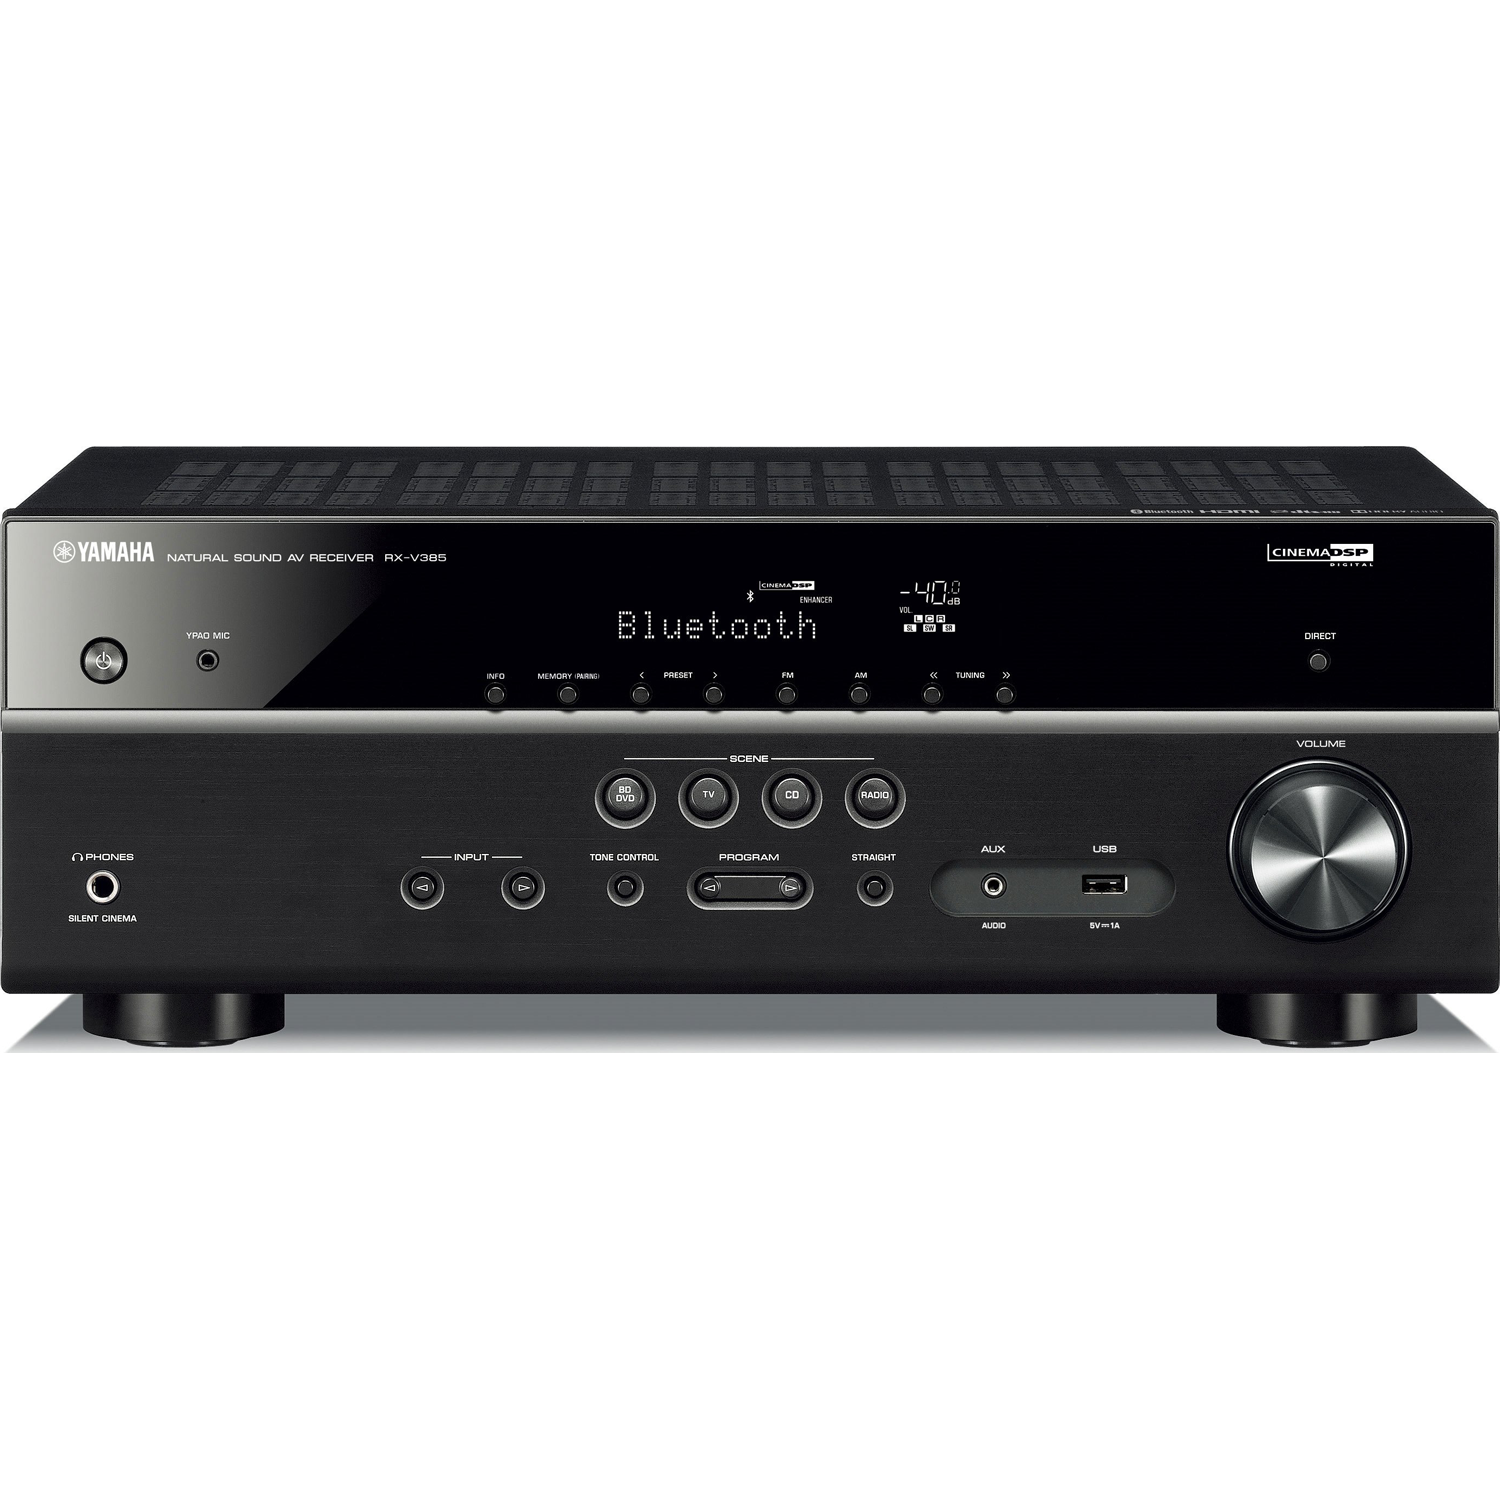 thee Eigenwijs banjo YAMAHA RX-V385 5.1-Ch x 70 Watts Bluetooth A/V Receiver | Accessories4less